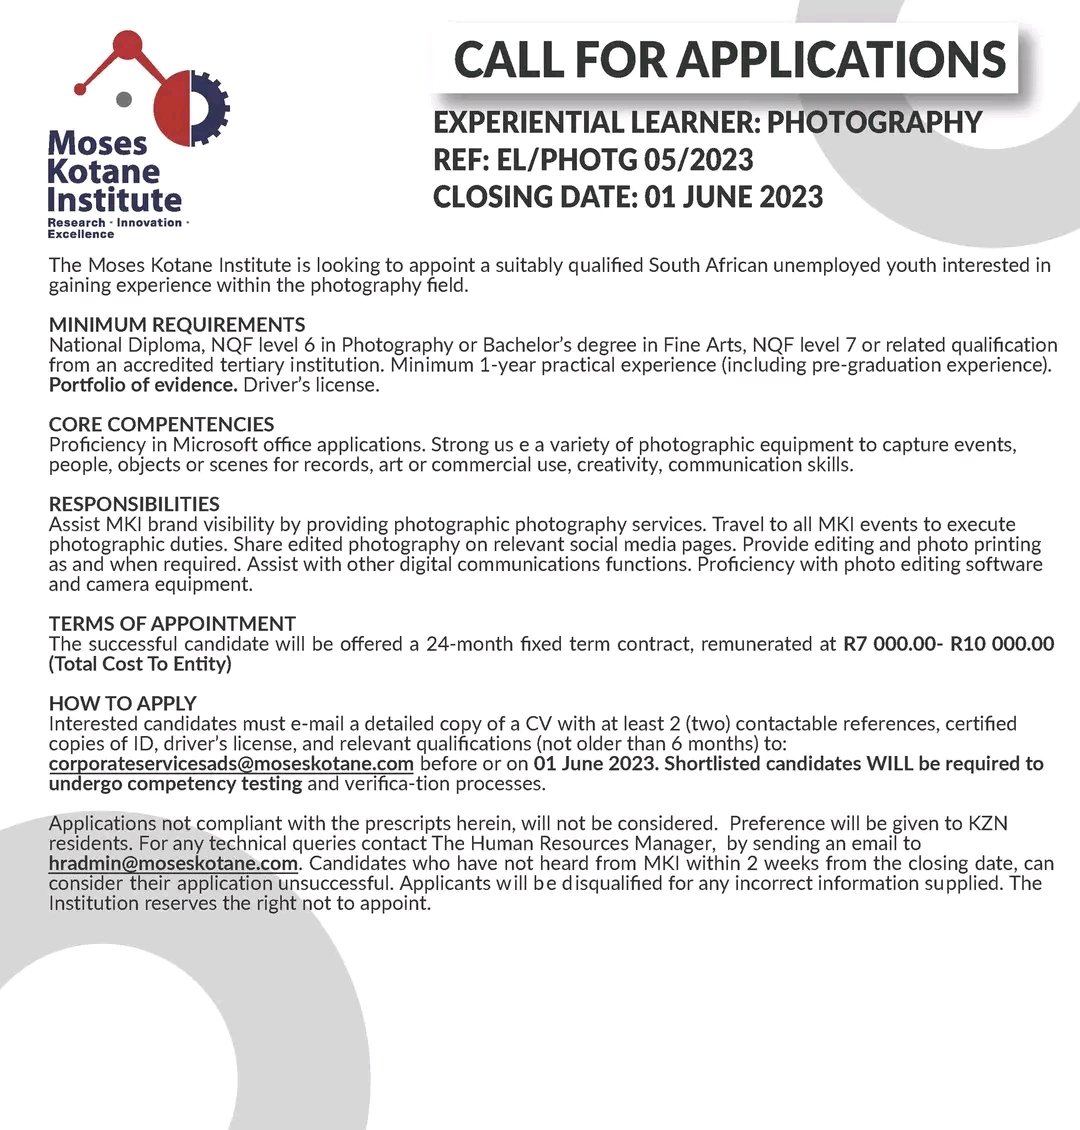 CALL FOR APPLICATIONS!!!
The Moses Kotane Institute is looking to appoint a suitably qualified South African unemployed youth interested in gaining experience within the photography field.
#MKI
#callforapplications
#photography